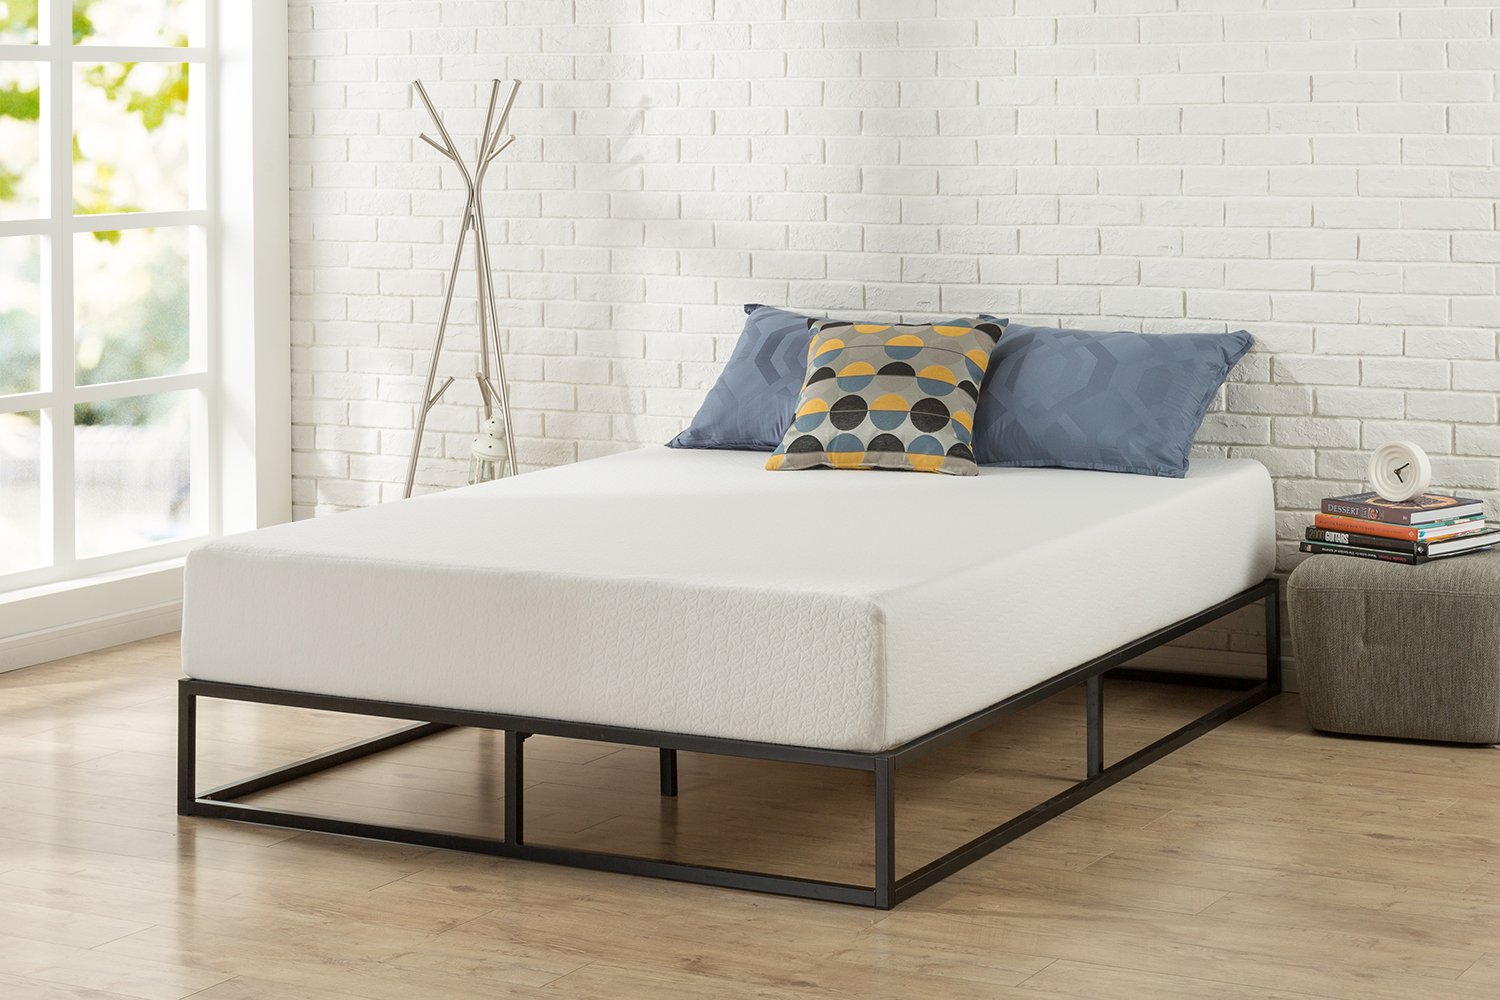 The Best Bed Frames February 2022, Best Collapsible Bed Frame